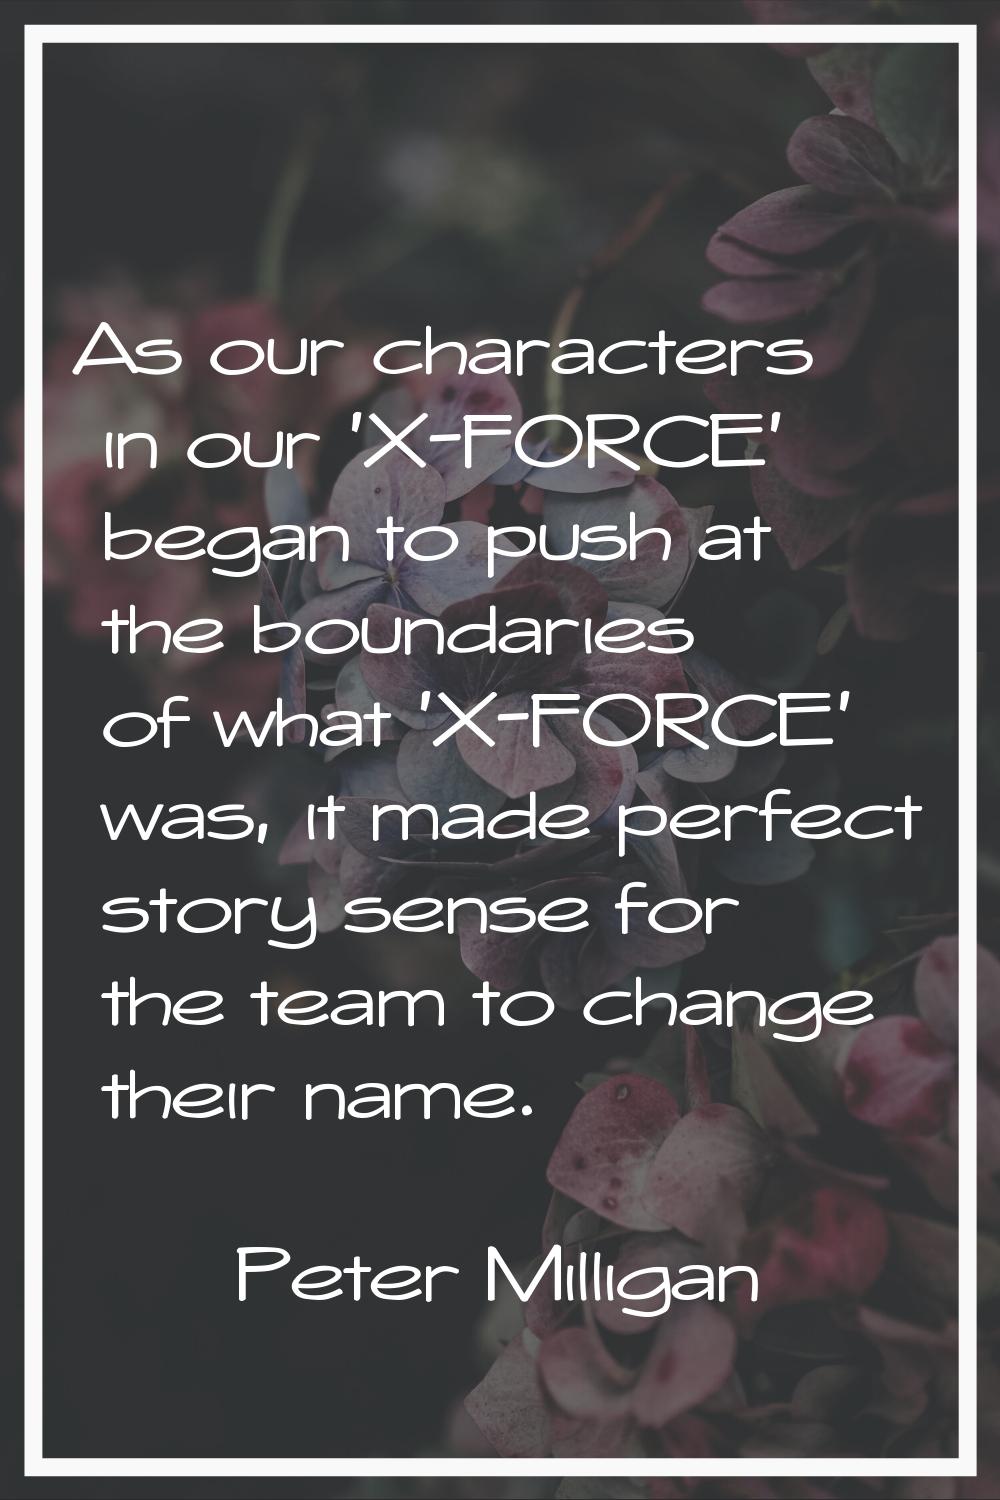 As our characters in our 'X-FORCE' began to push at the boundaries of what 'X-FORCE' was, it made p